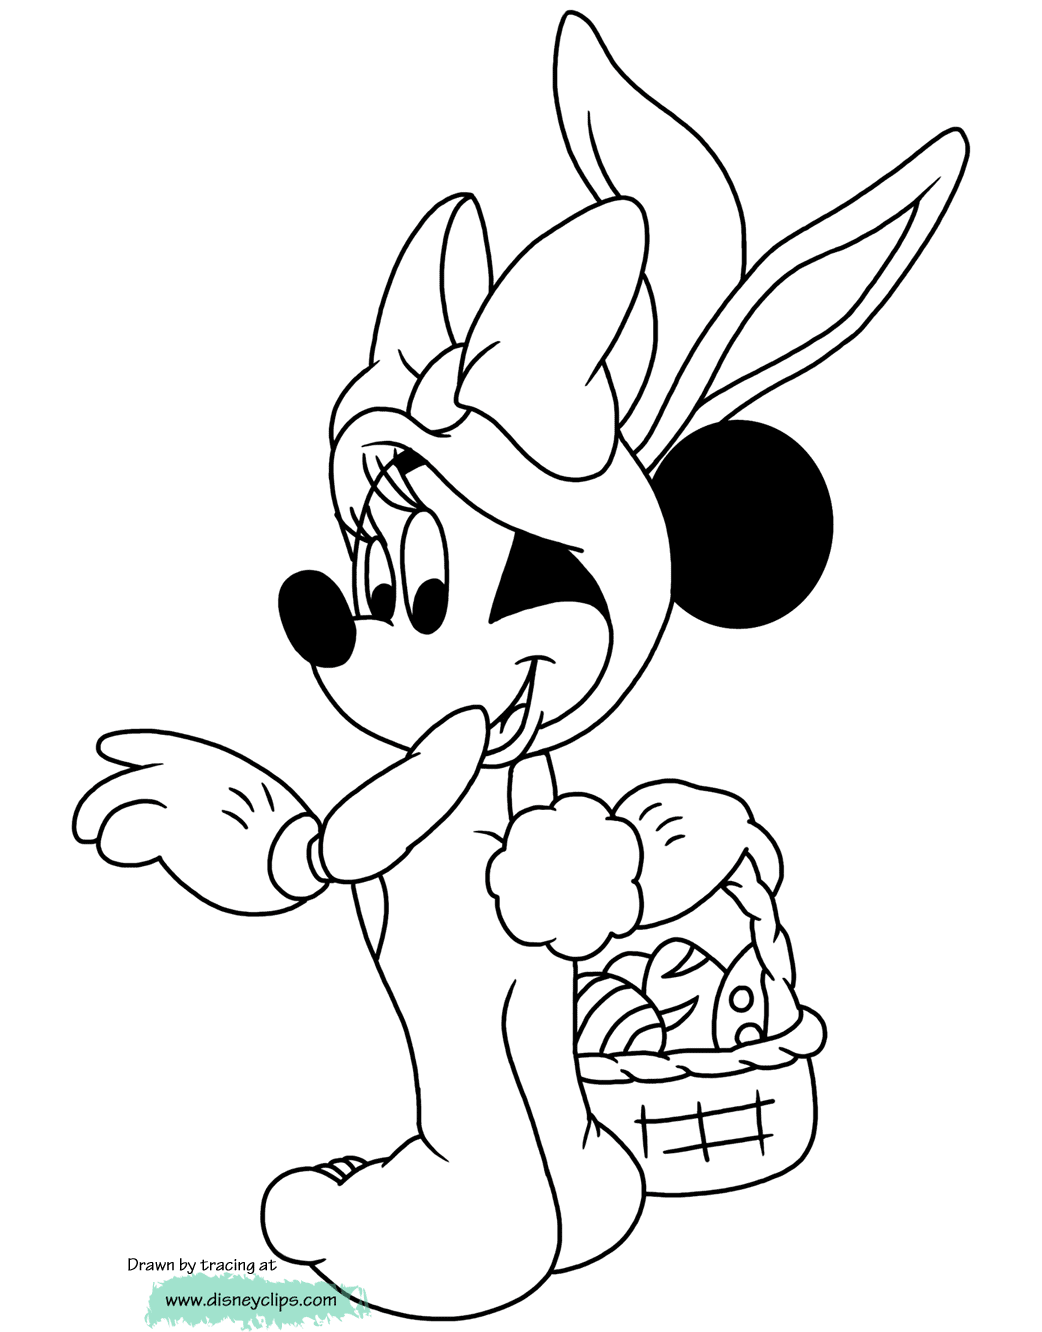 Download Disney Easter Coloring Pages | Disney's World of Wonders